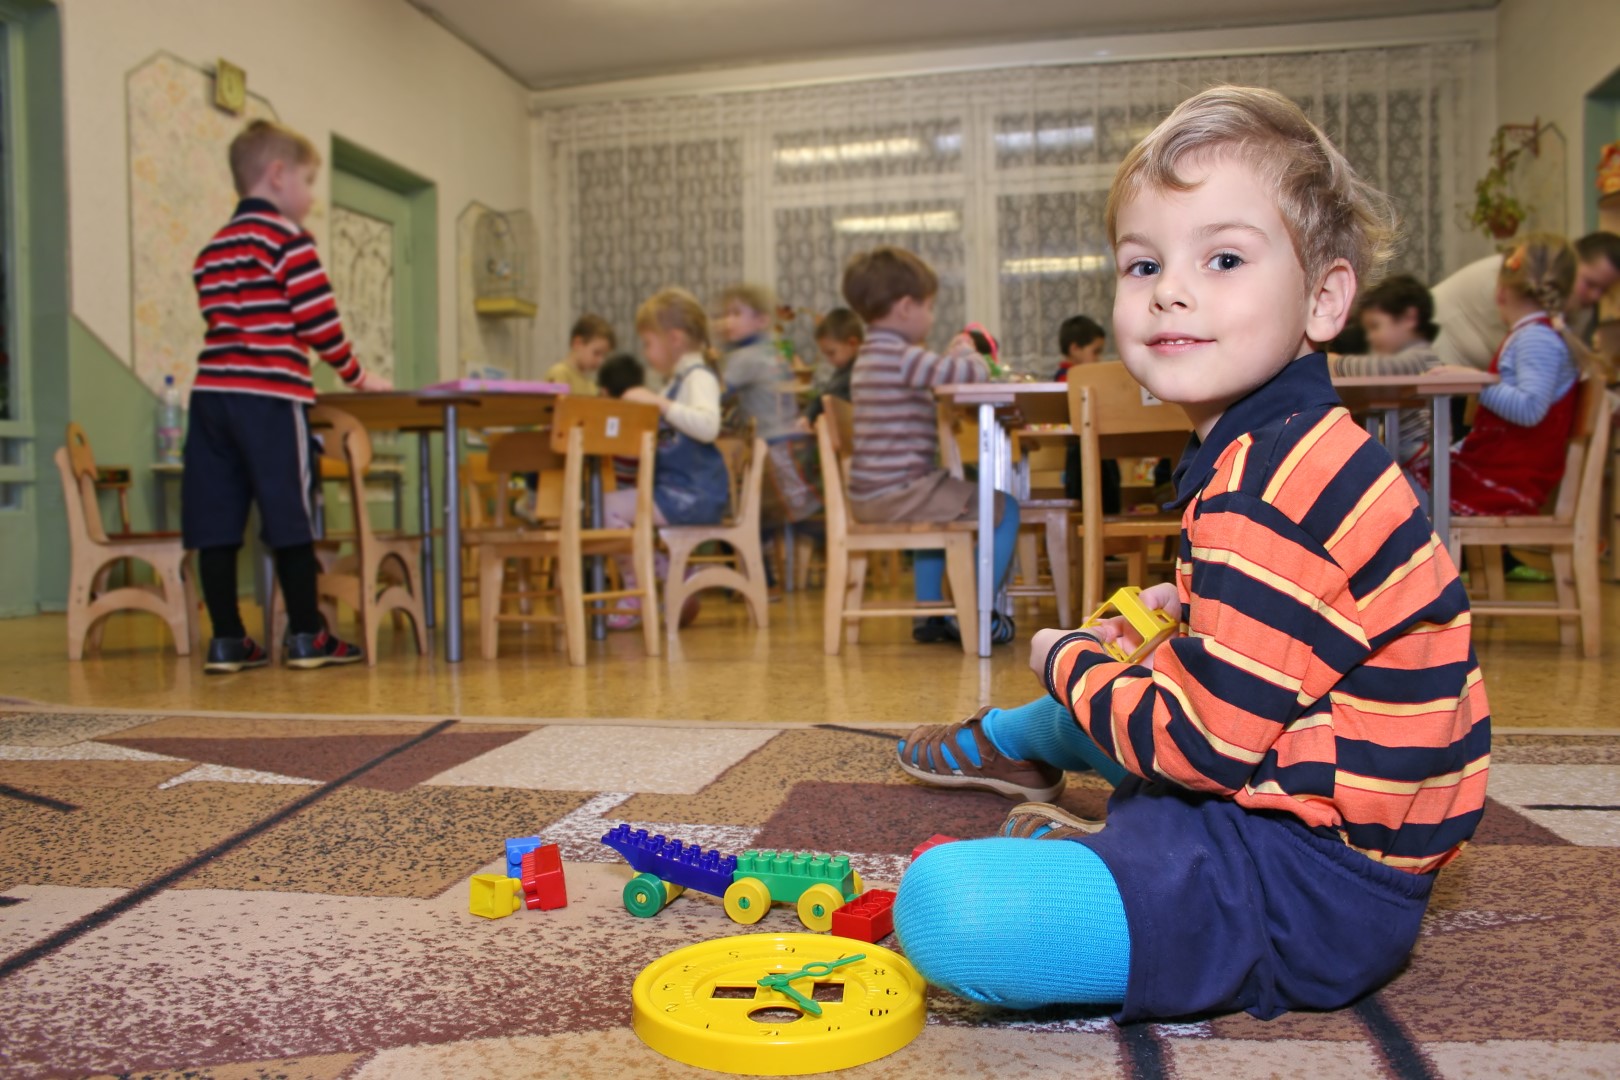 Child Care Centres in Western Australia – a fool proof investment or a fools investment?